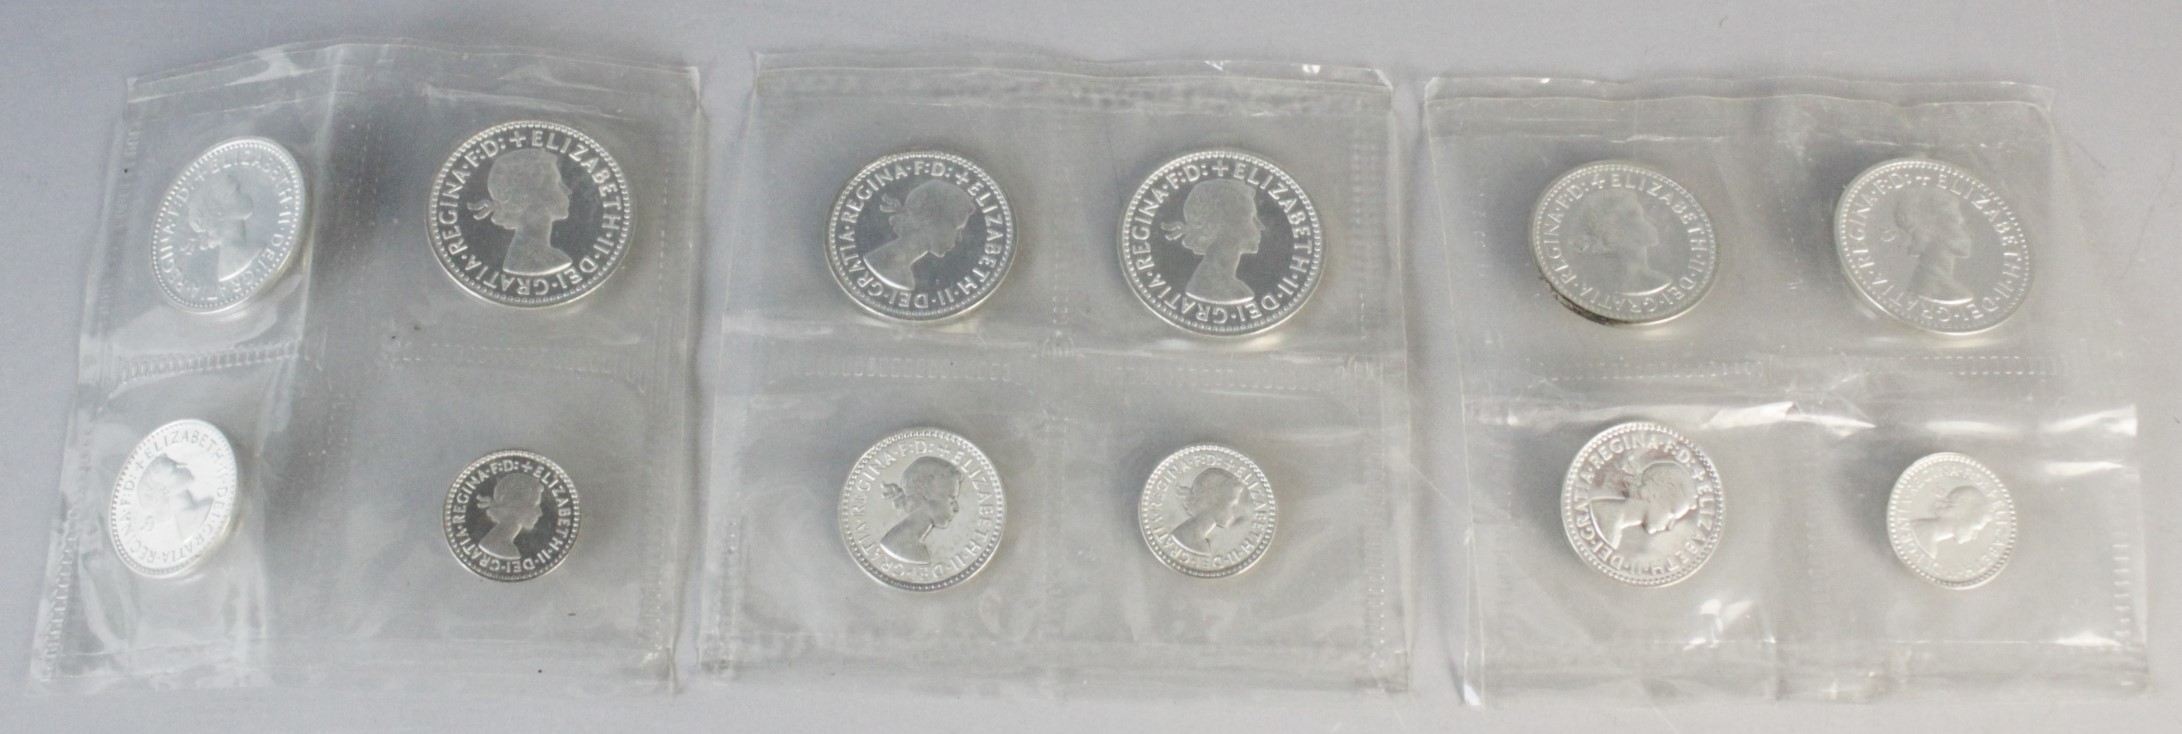 Three sealed Royal Mint sets of four Maundy money coins, each dated 1988, in a white leather